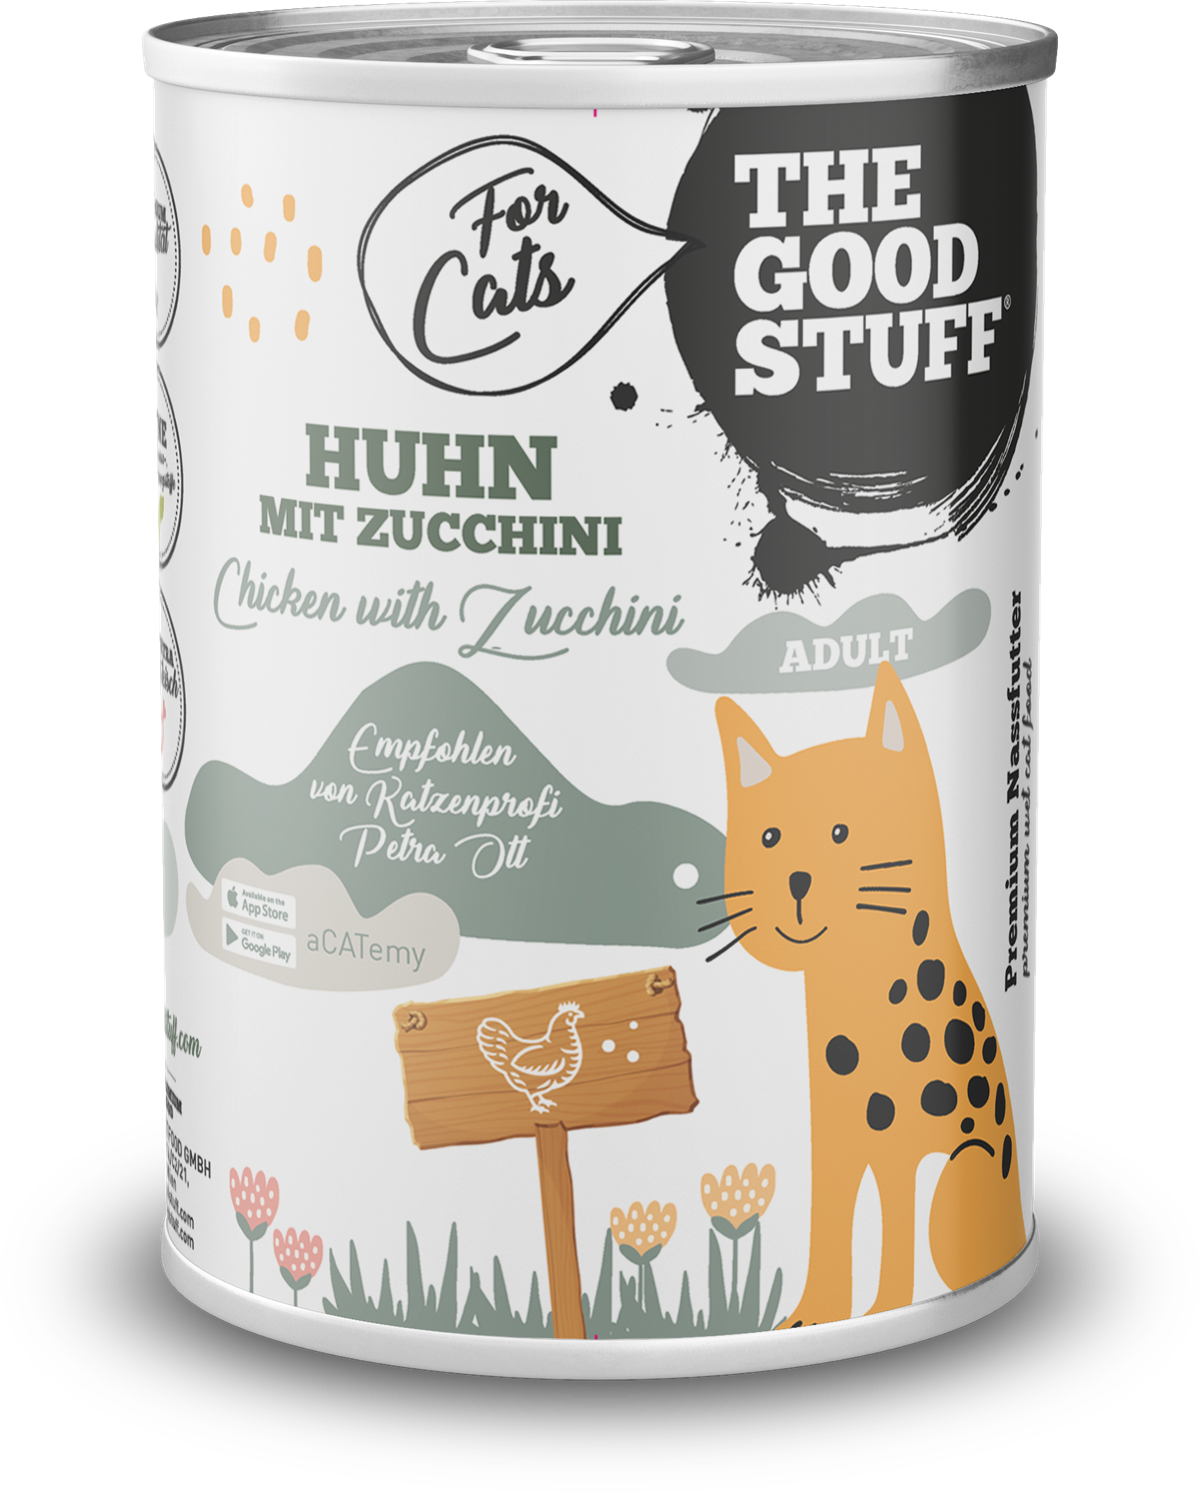 THE GOODSTUFF_For Cats_Huhn_400g_EUR 3,19